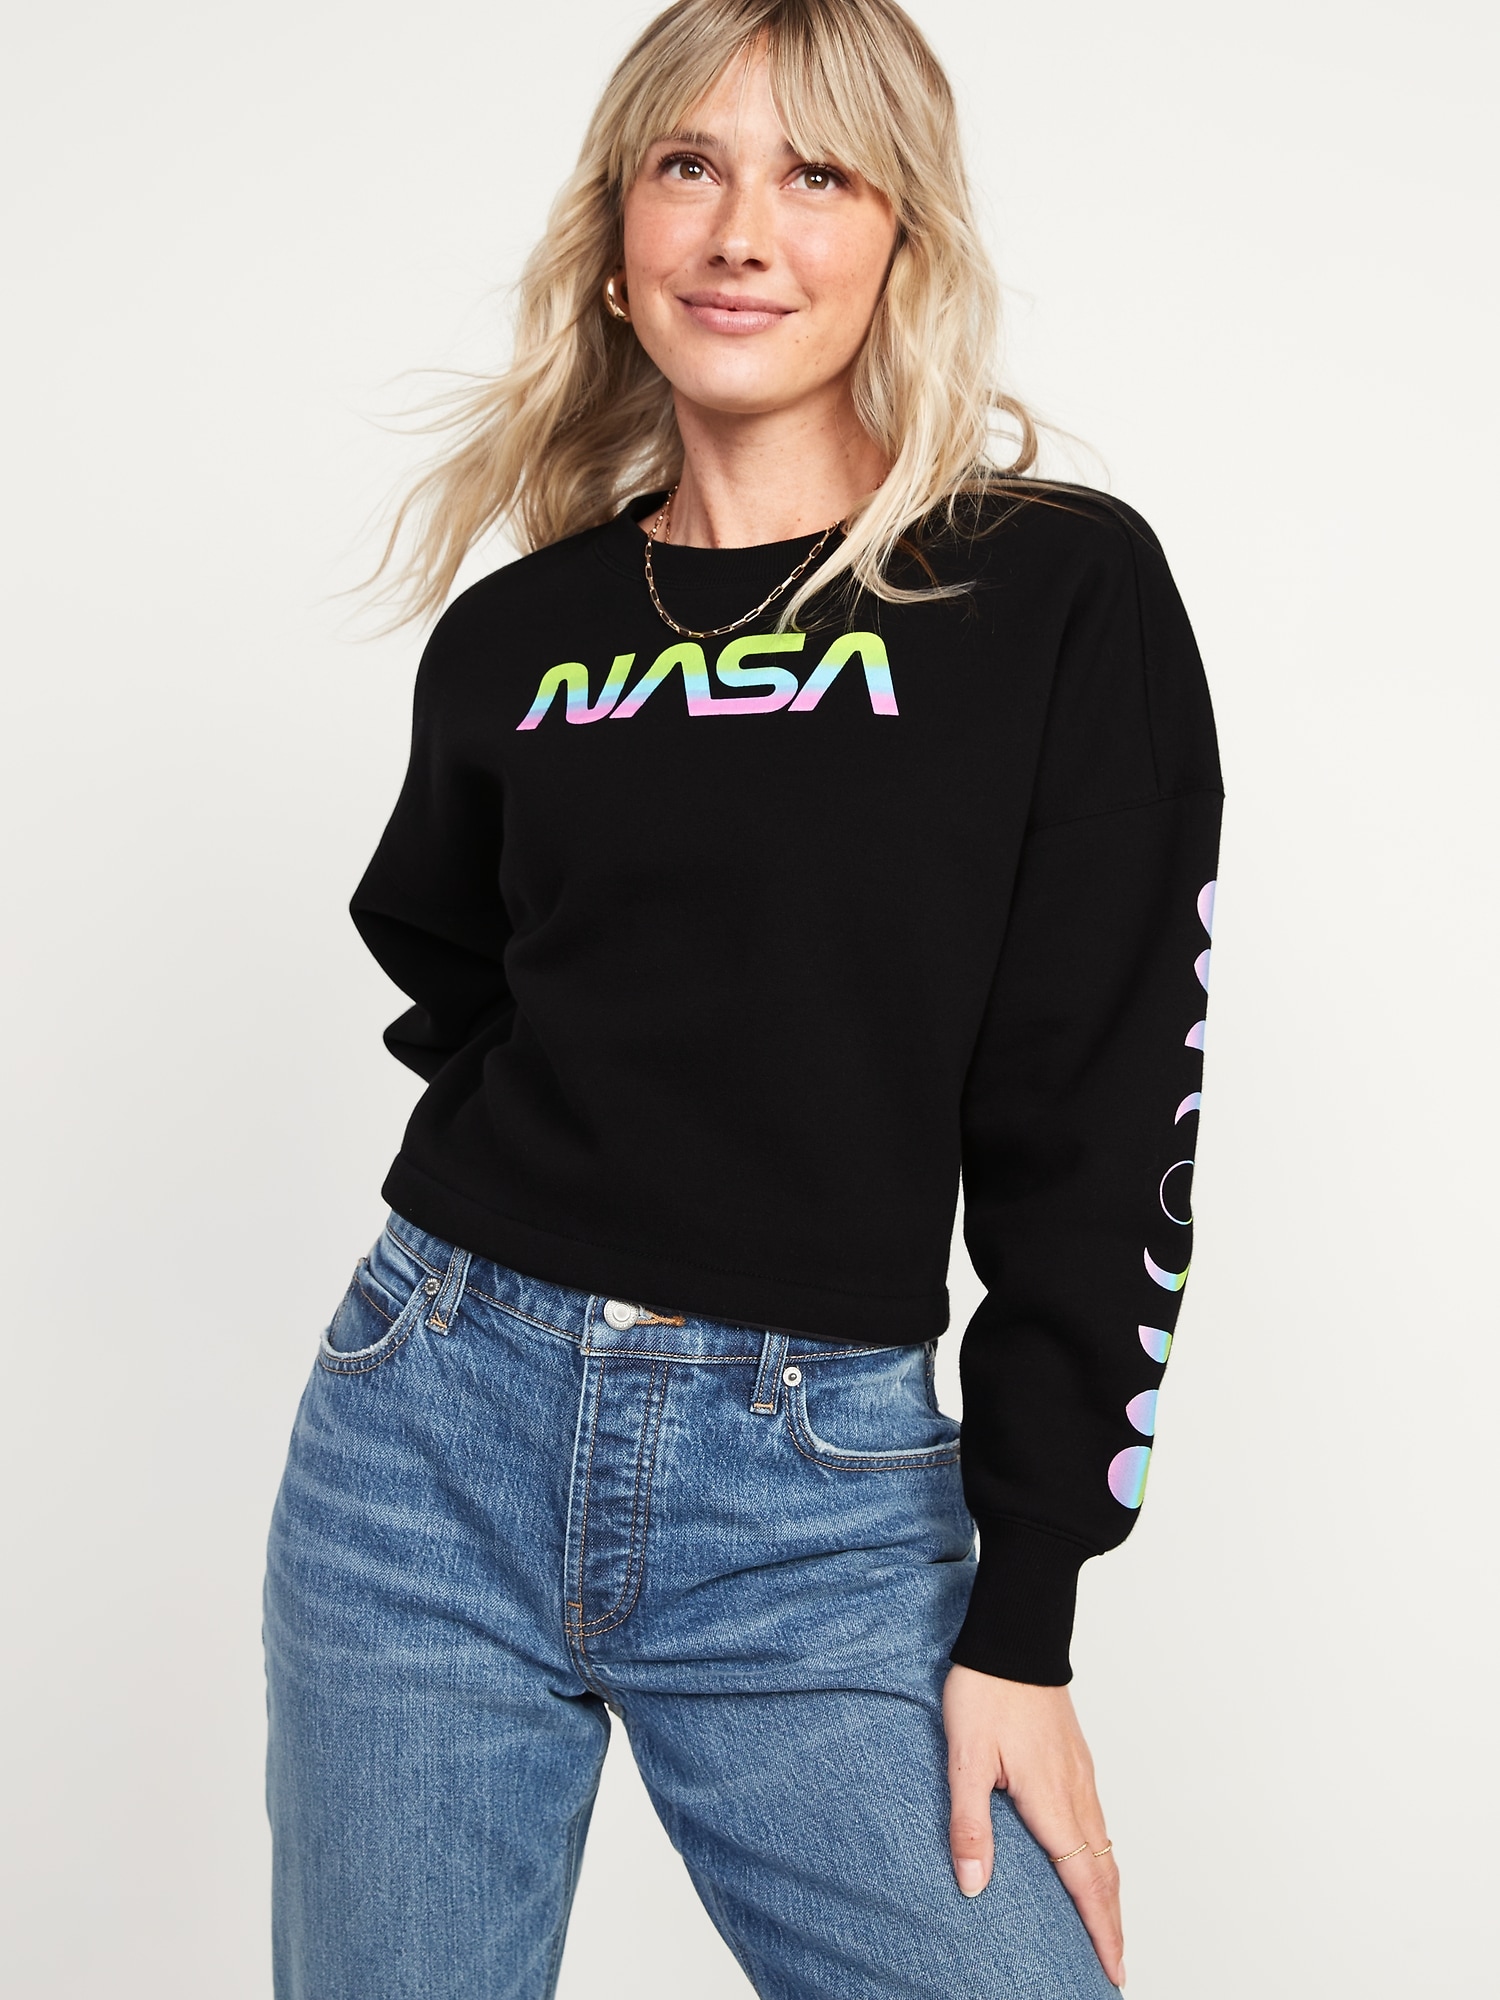 Oversized Cropped Licensed Pop Culture Graphic Sweatshirt for Women